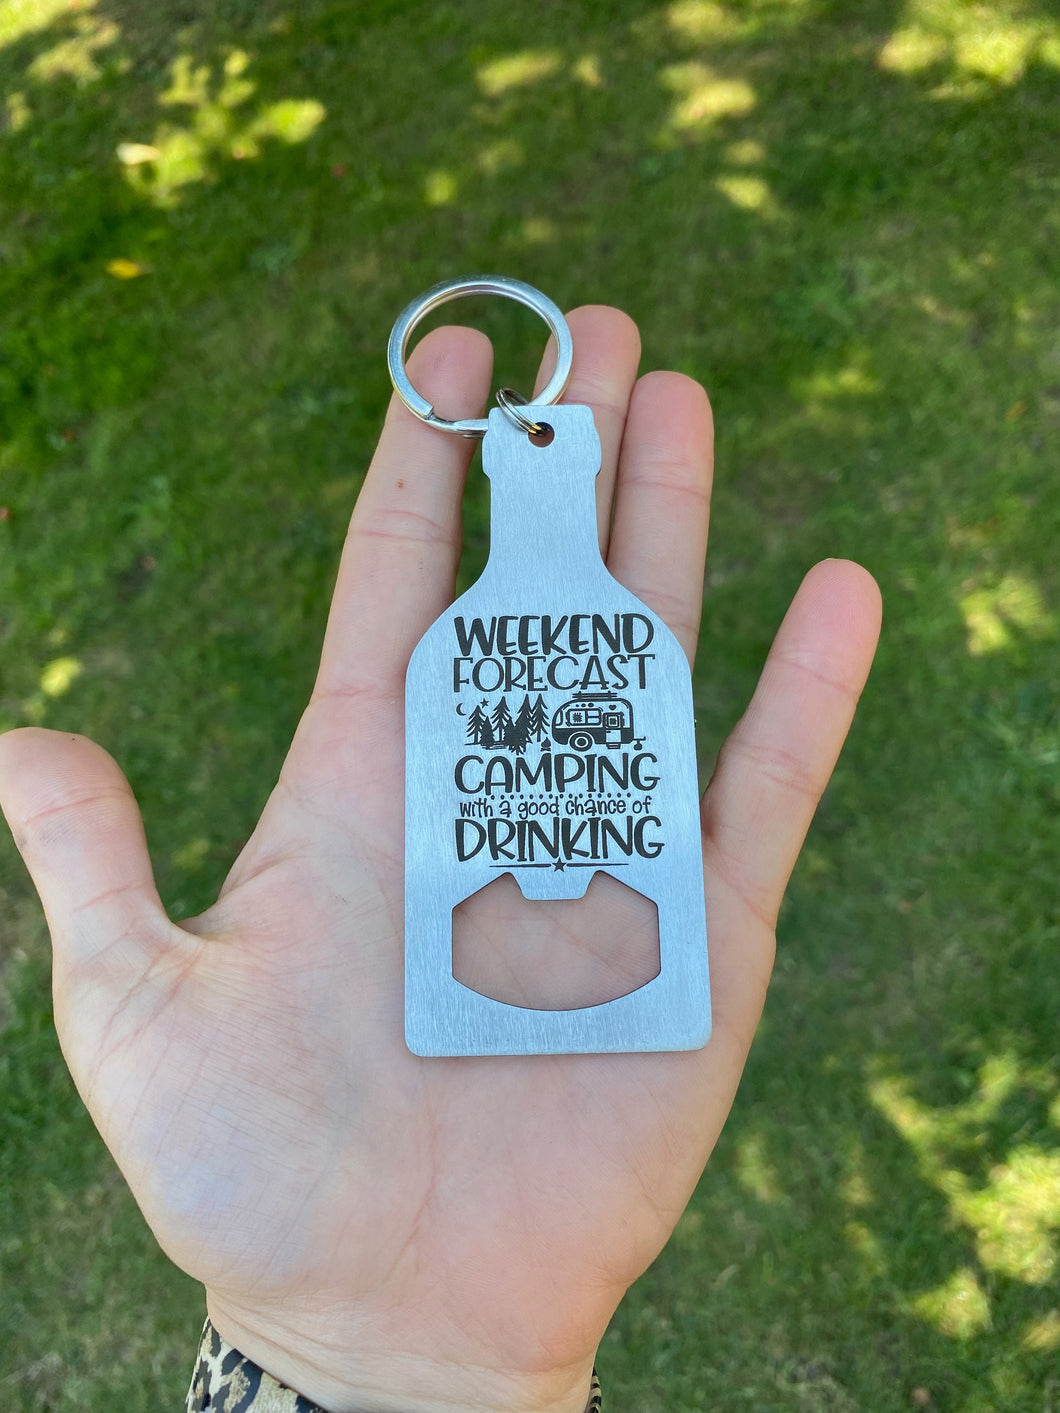 Camping with a chance of drinking - stainless steel bottle opener keychain - gift for him - gift for friend  beer bottle opener key ring